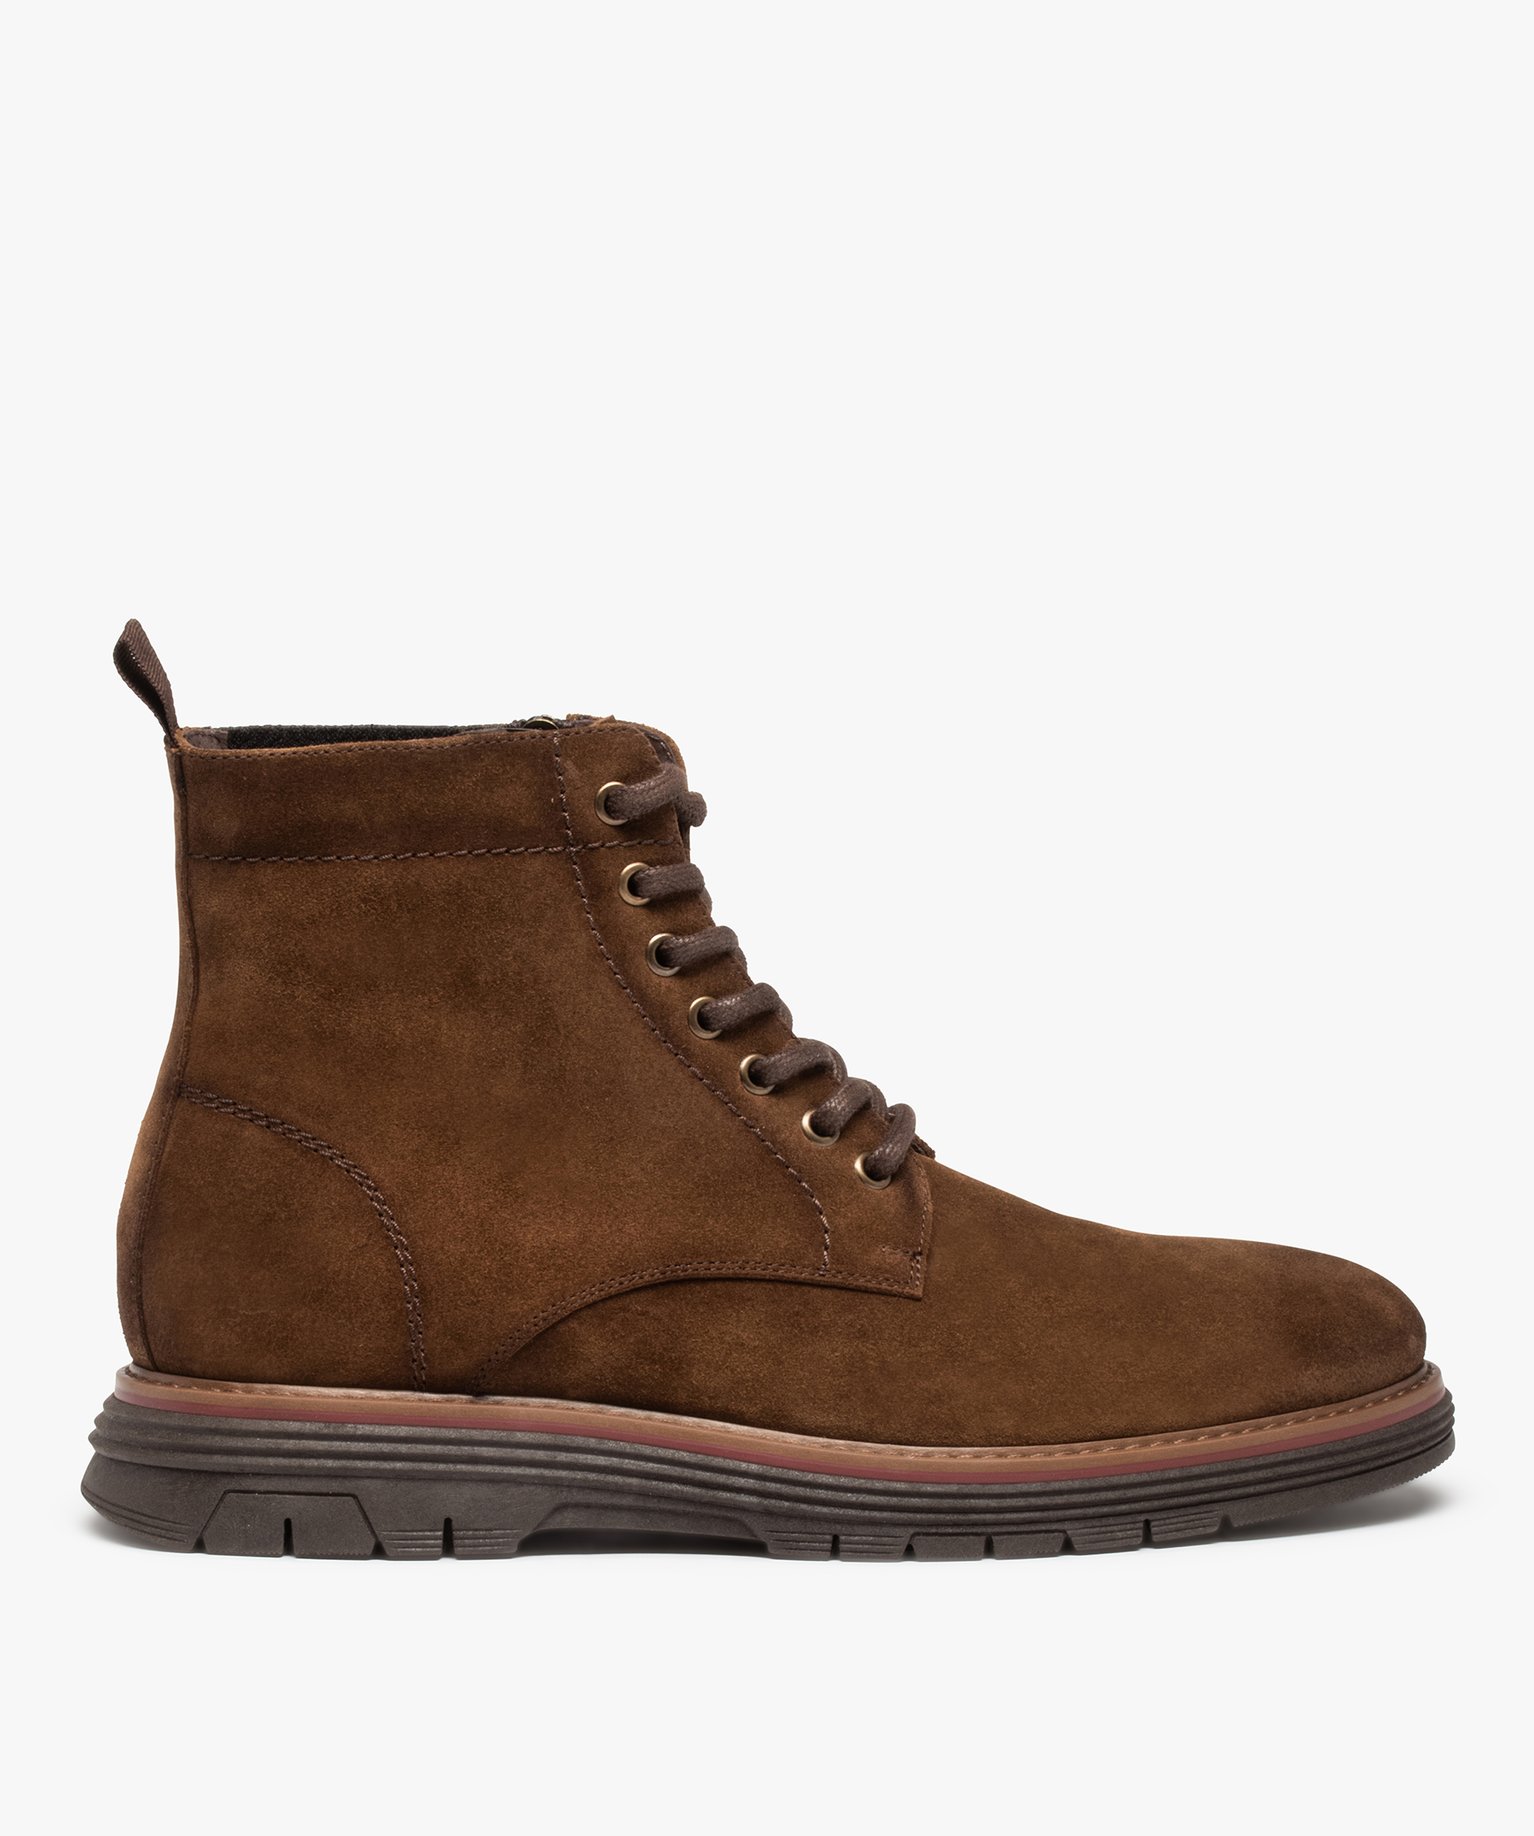 boots homme unies dessus cuir a lacets - taneo brun